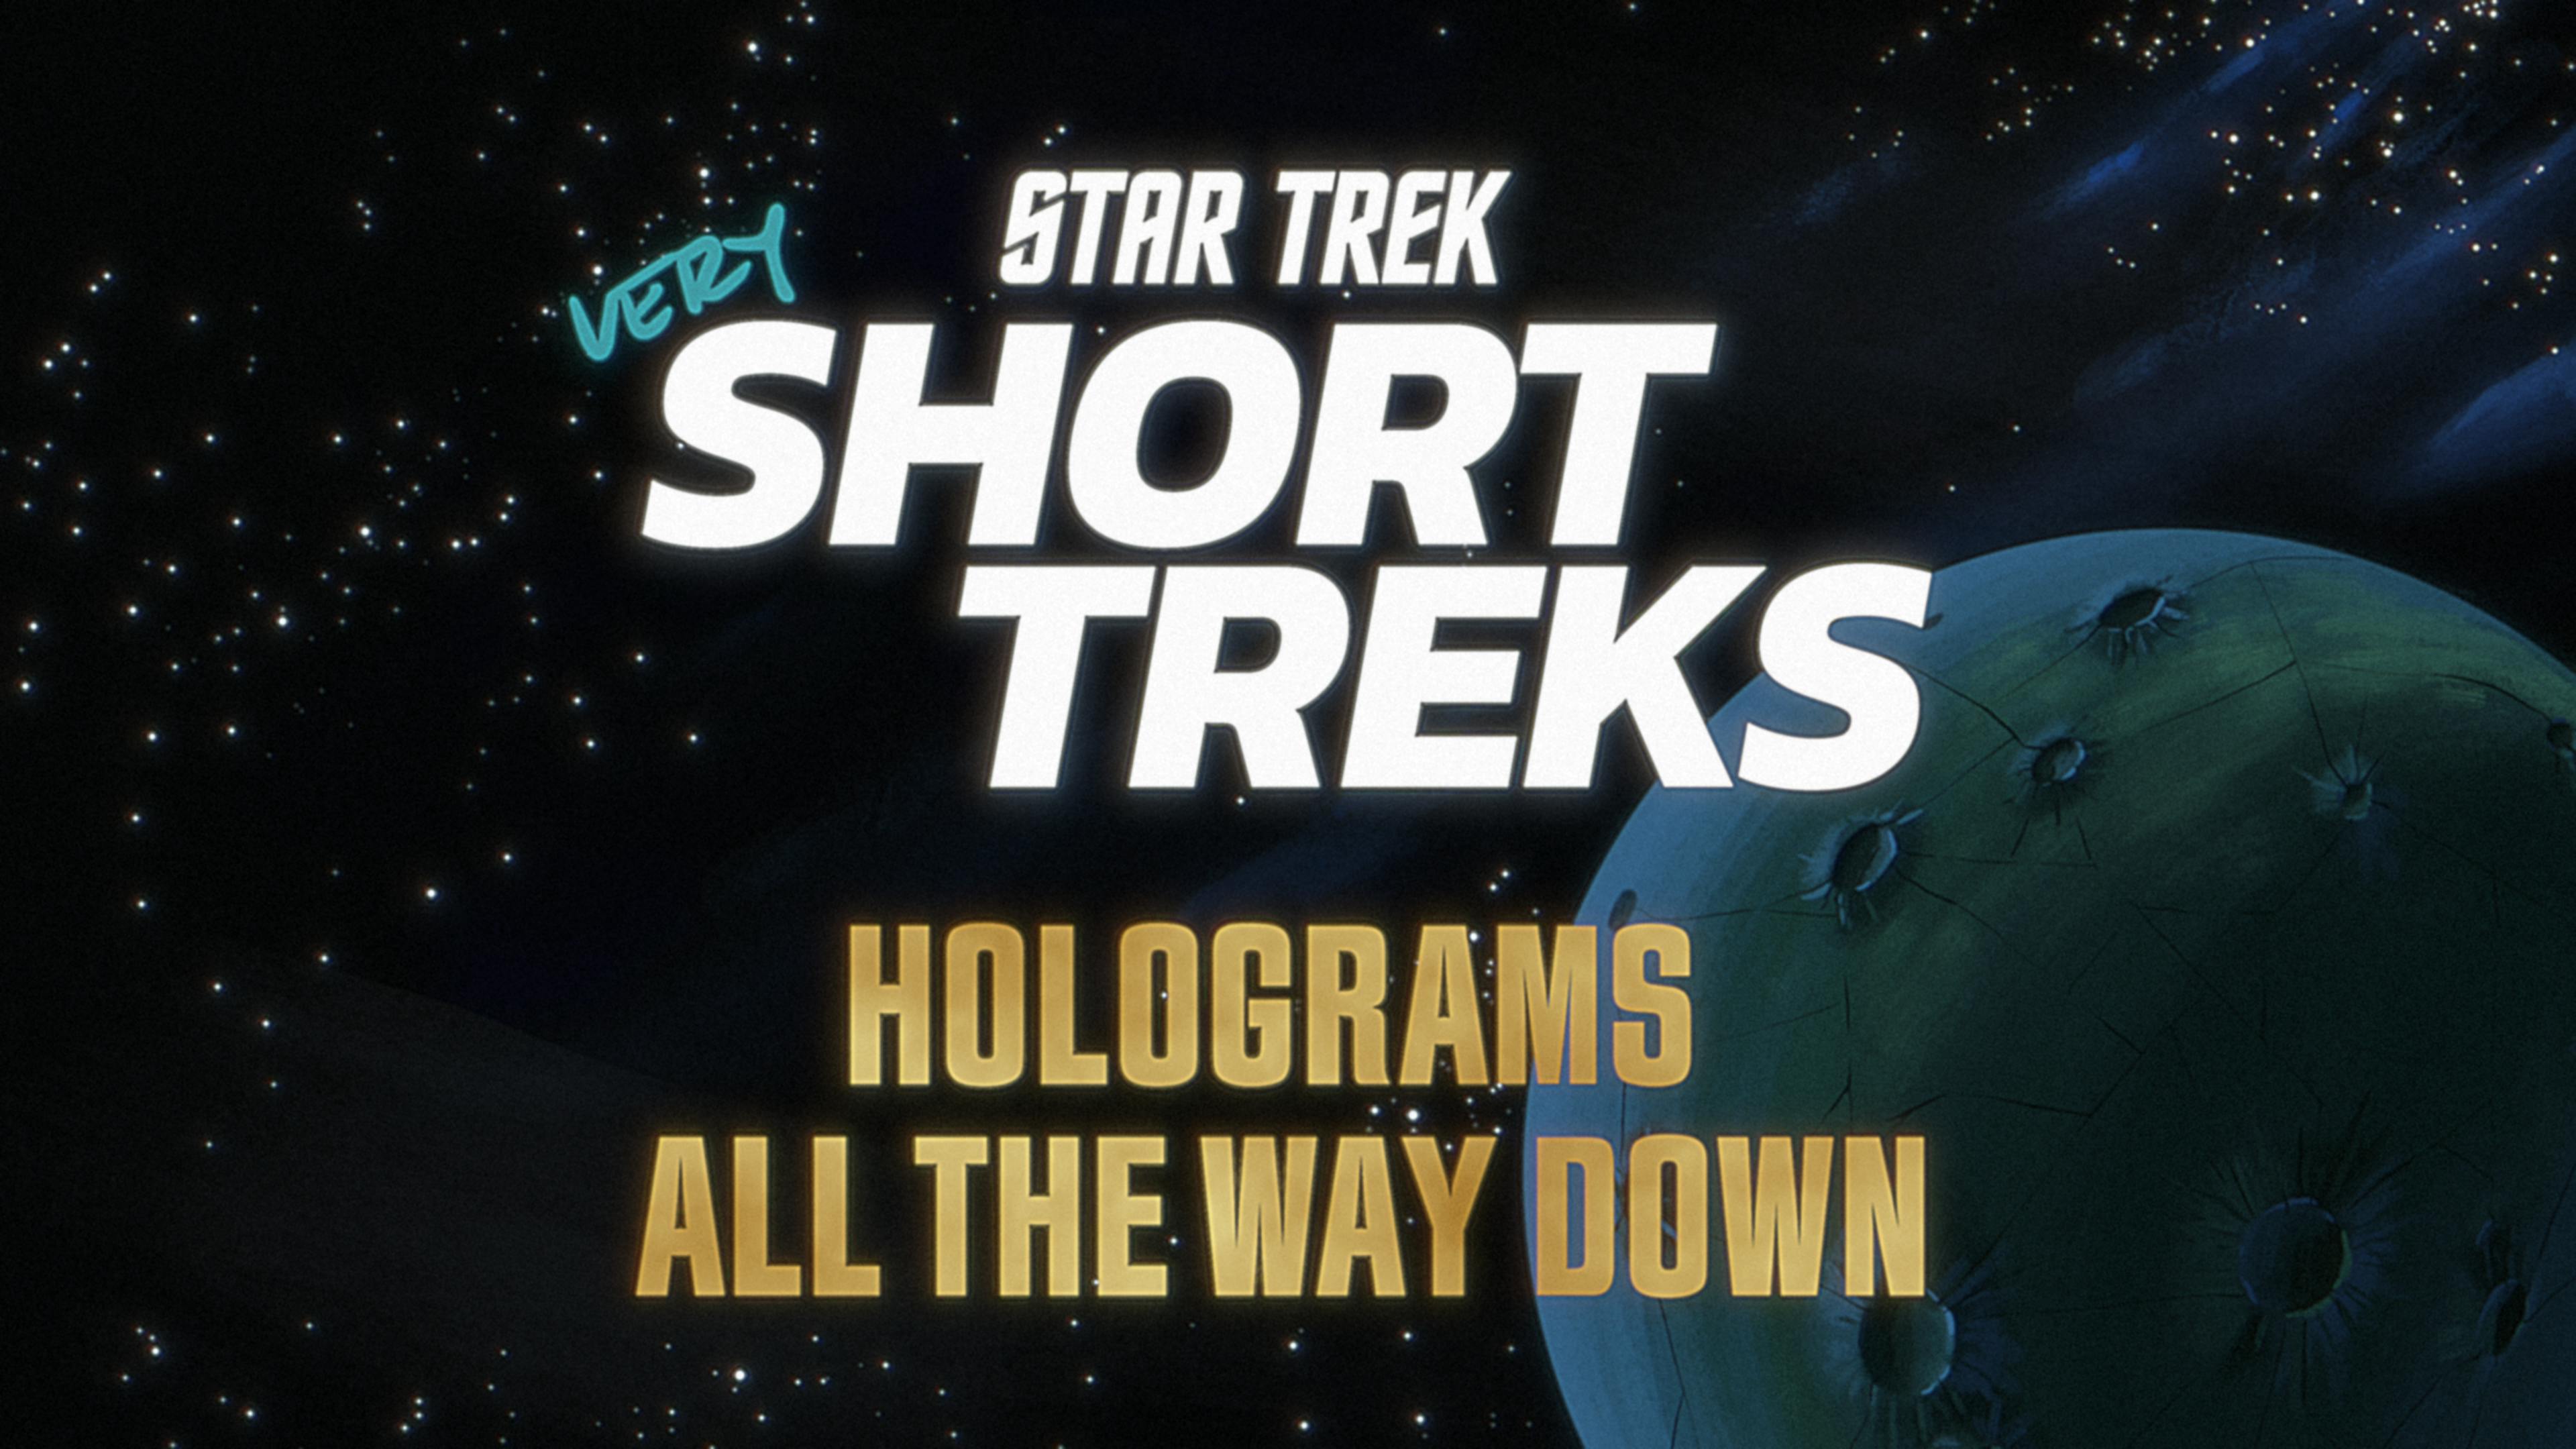 Star Trek: very Short Treks title treatment with 'Holograms All the Way Down' text